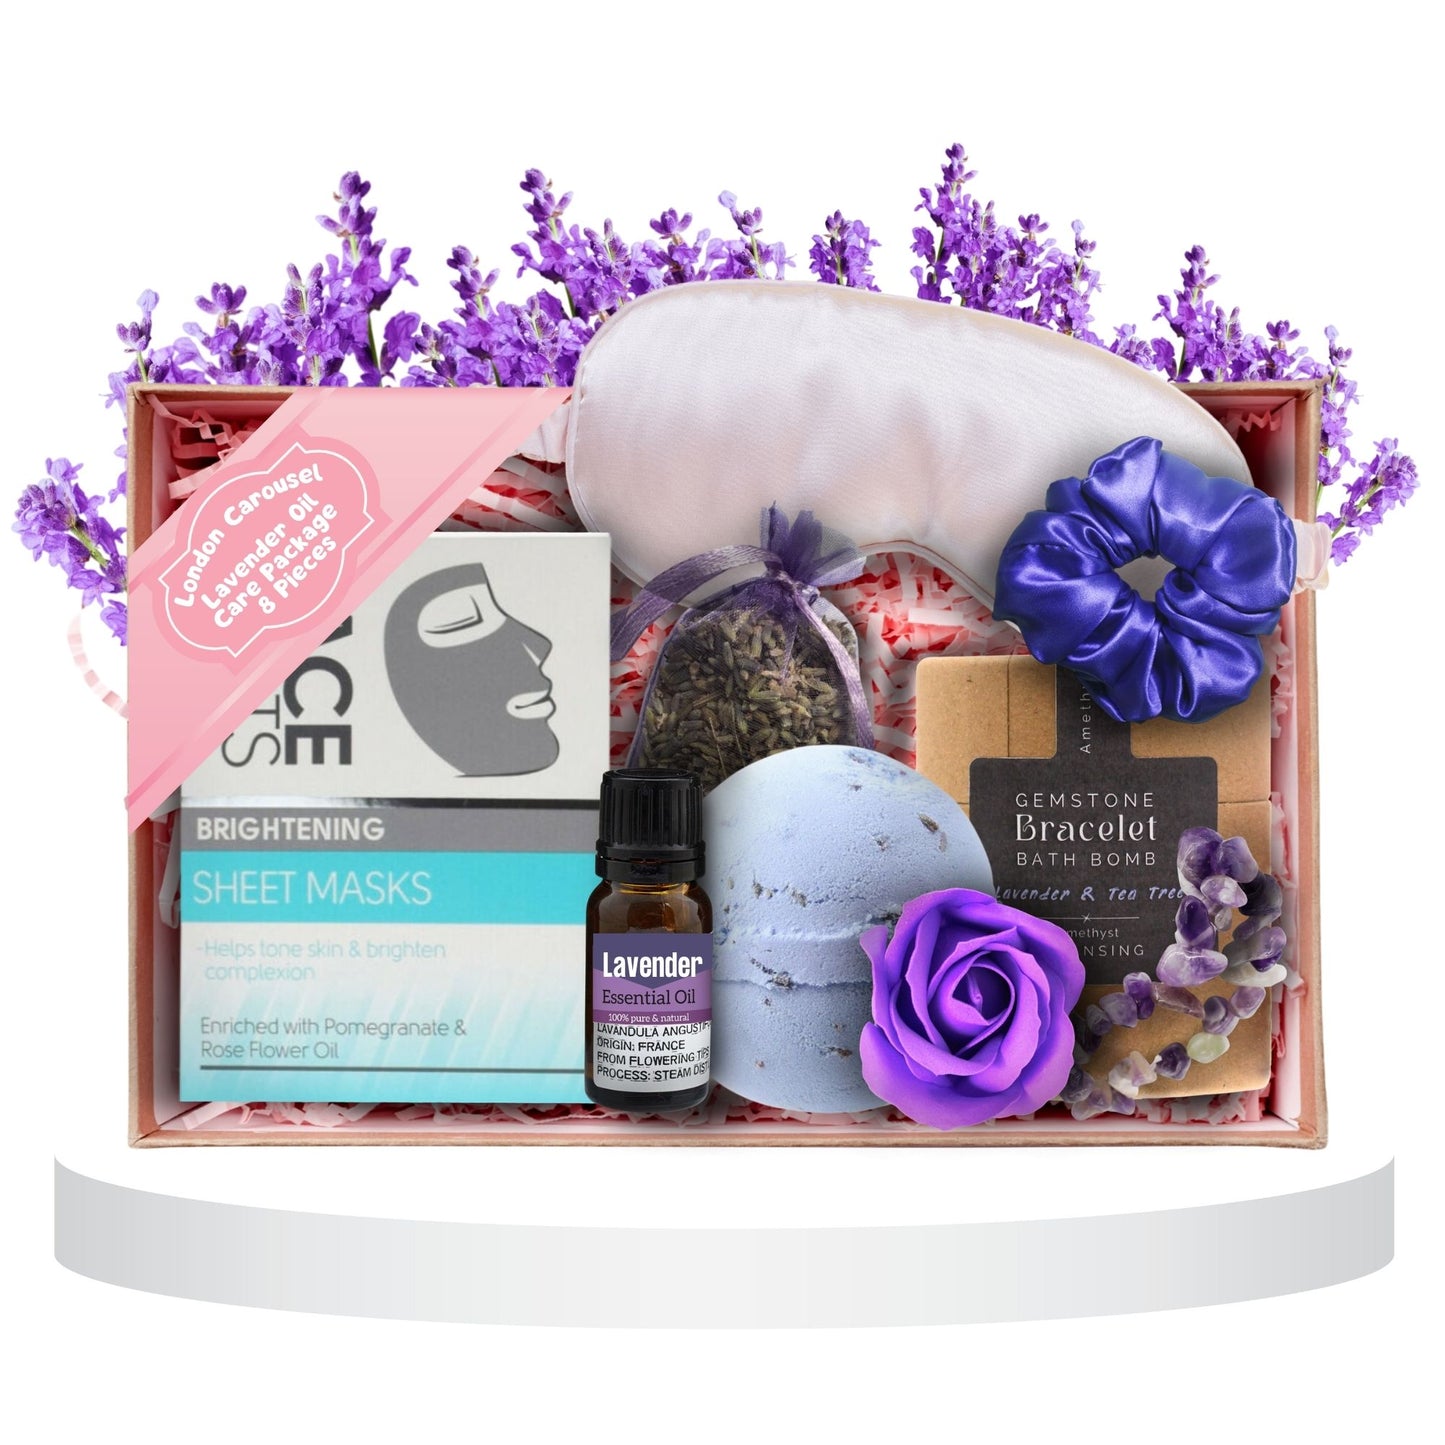 Indulge in relaxation with the Lavender Dreams Spa Gift, featuring lavender-scented bath bomb, a soothing eye mask, calming lavender essential oil, Lavender Pillow Bag, Lavender Rose Soap, and Lavender Bath Bomb with Amethyst Bracelet Inside Perfect for a spa-like experience at home.